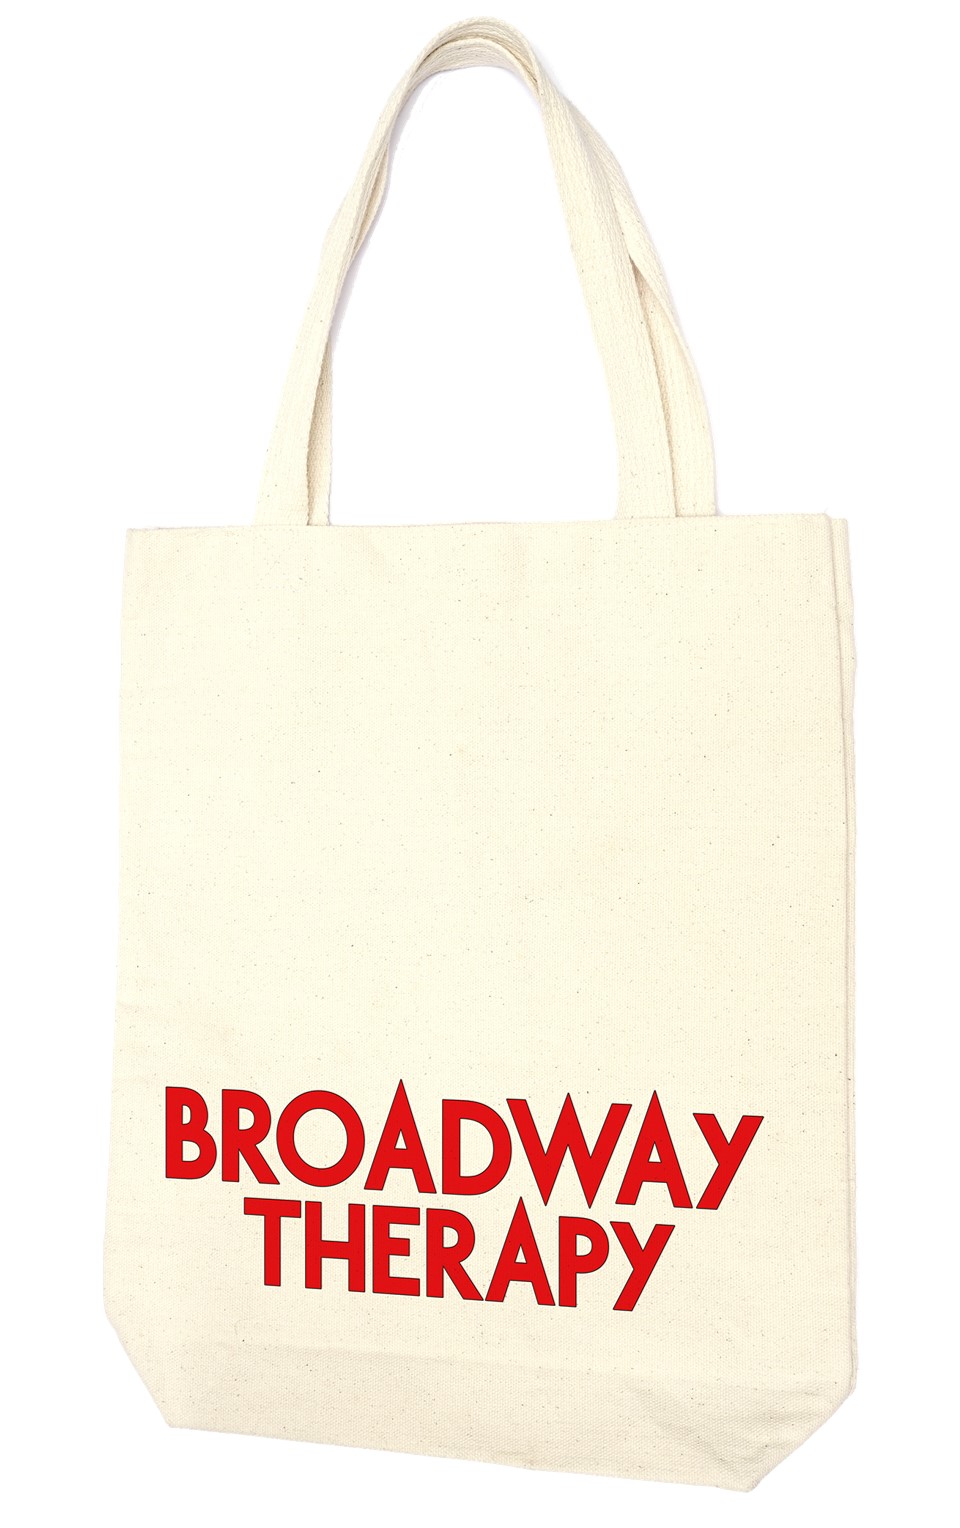 BROADWAY THERAPY - Tote bags sacs concours à gagner - Go with the Blog